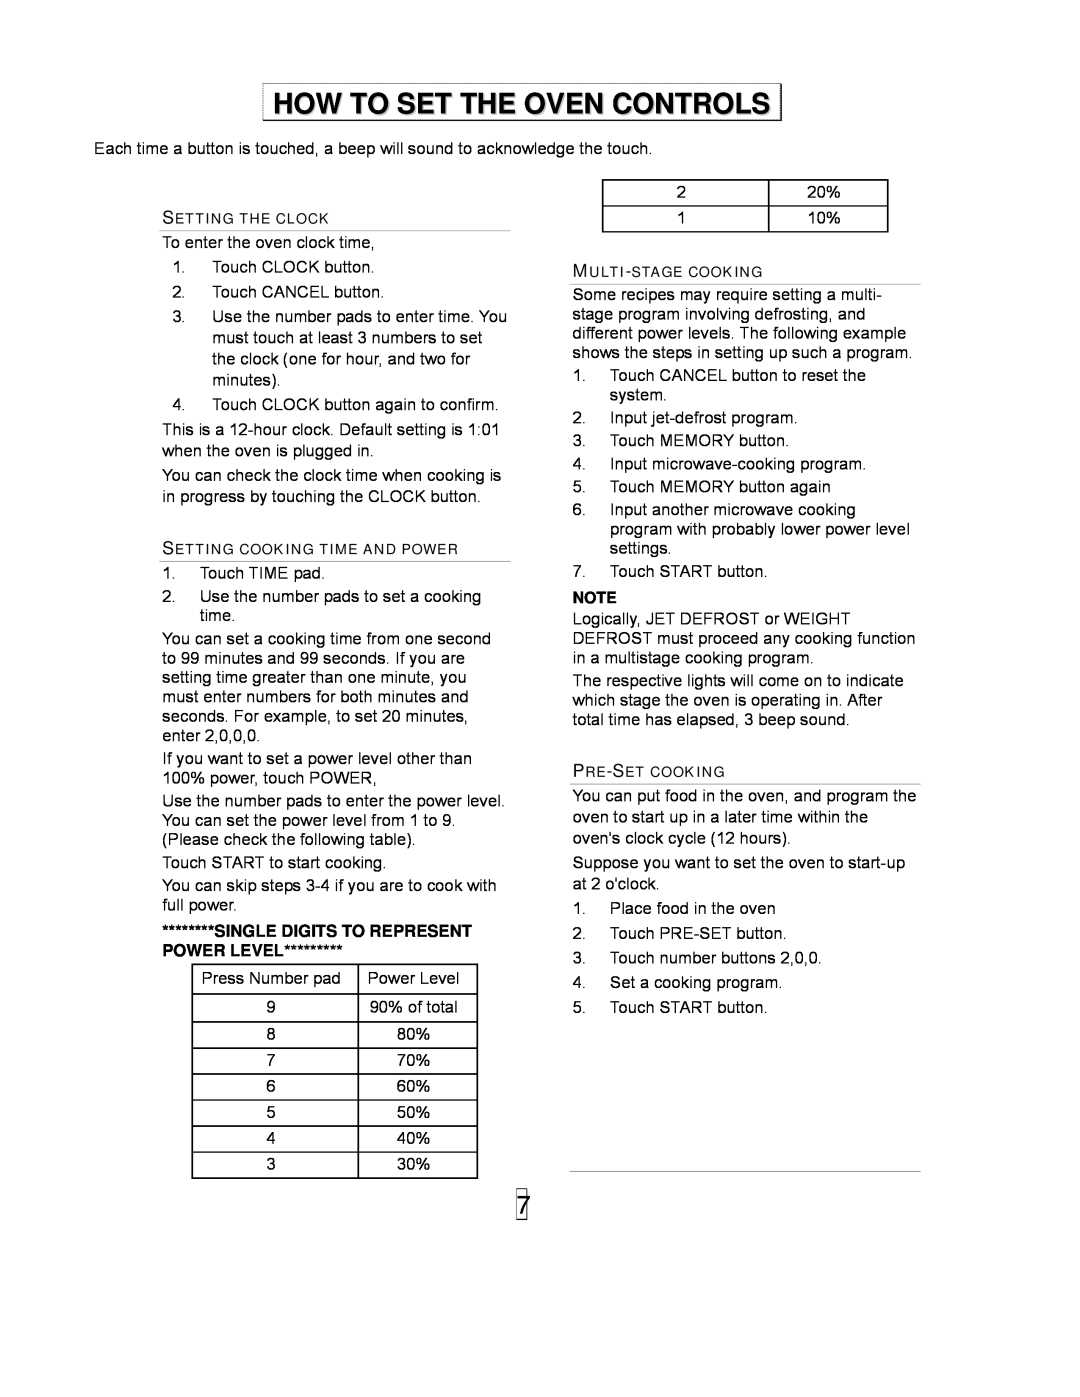 Sanyo EM-S8597V owner manual How To Set The Oven Controls, Single Digits To Represent Power Level 